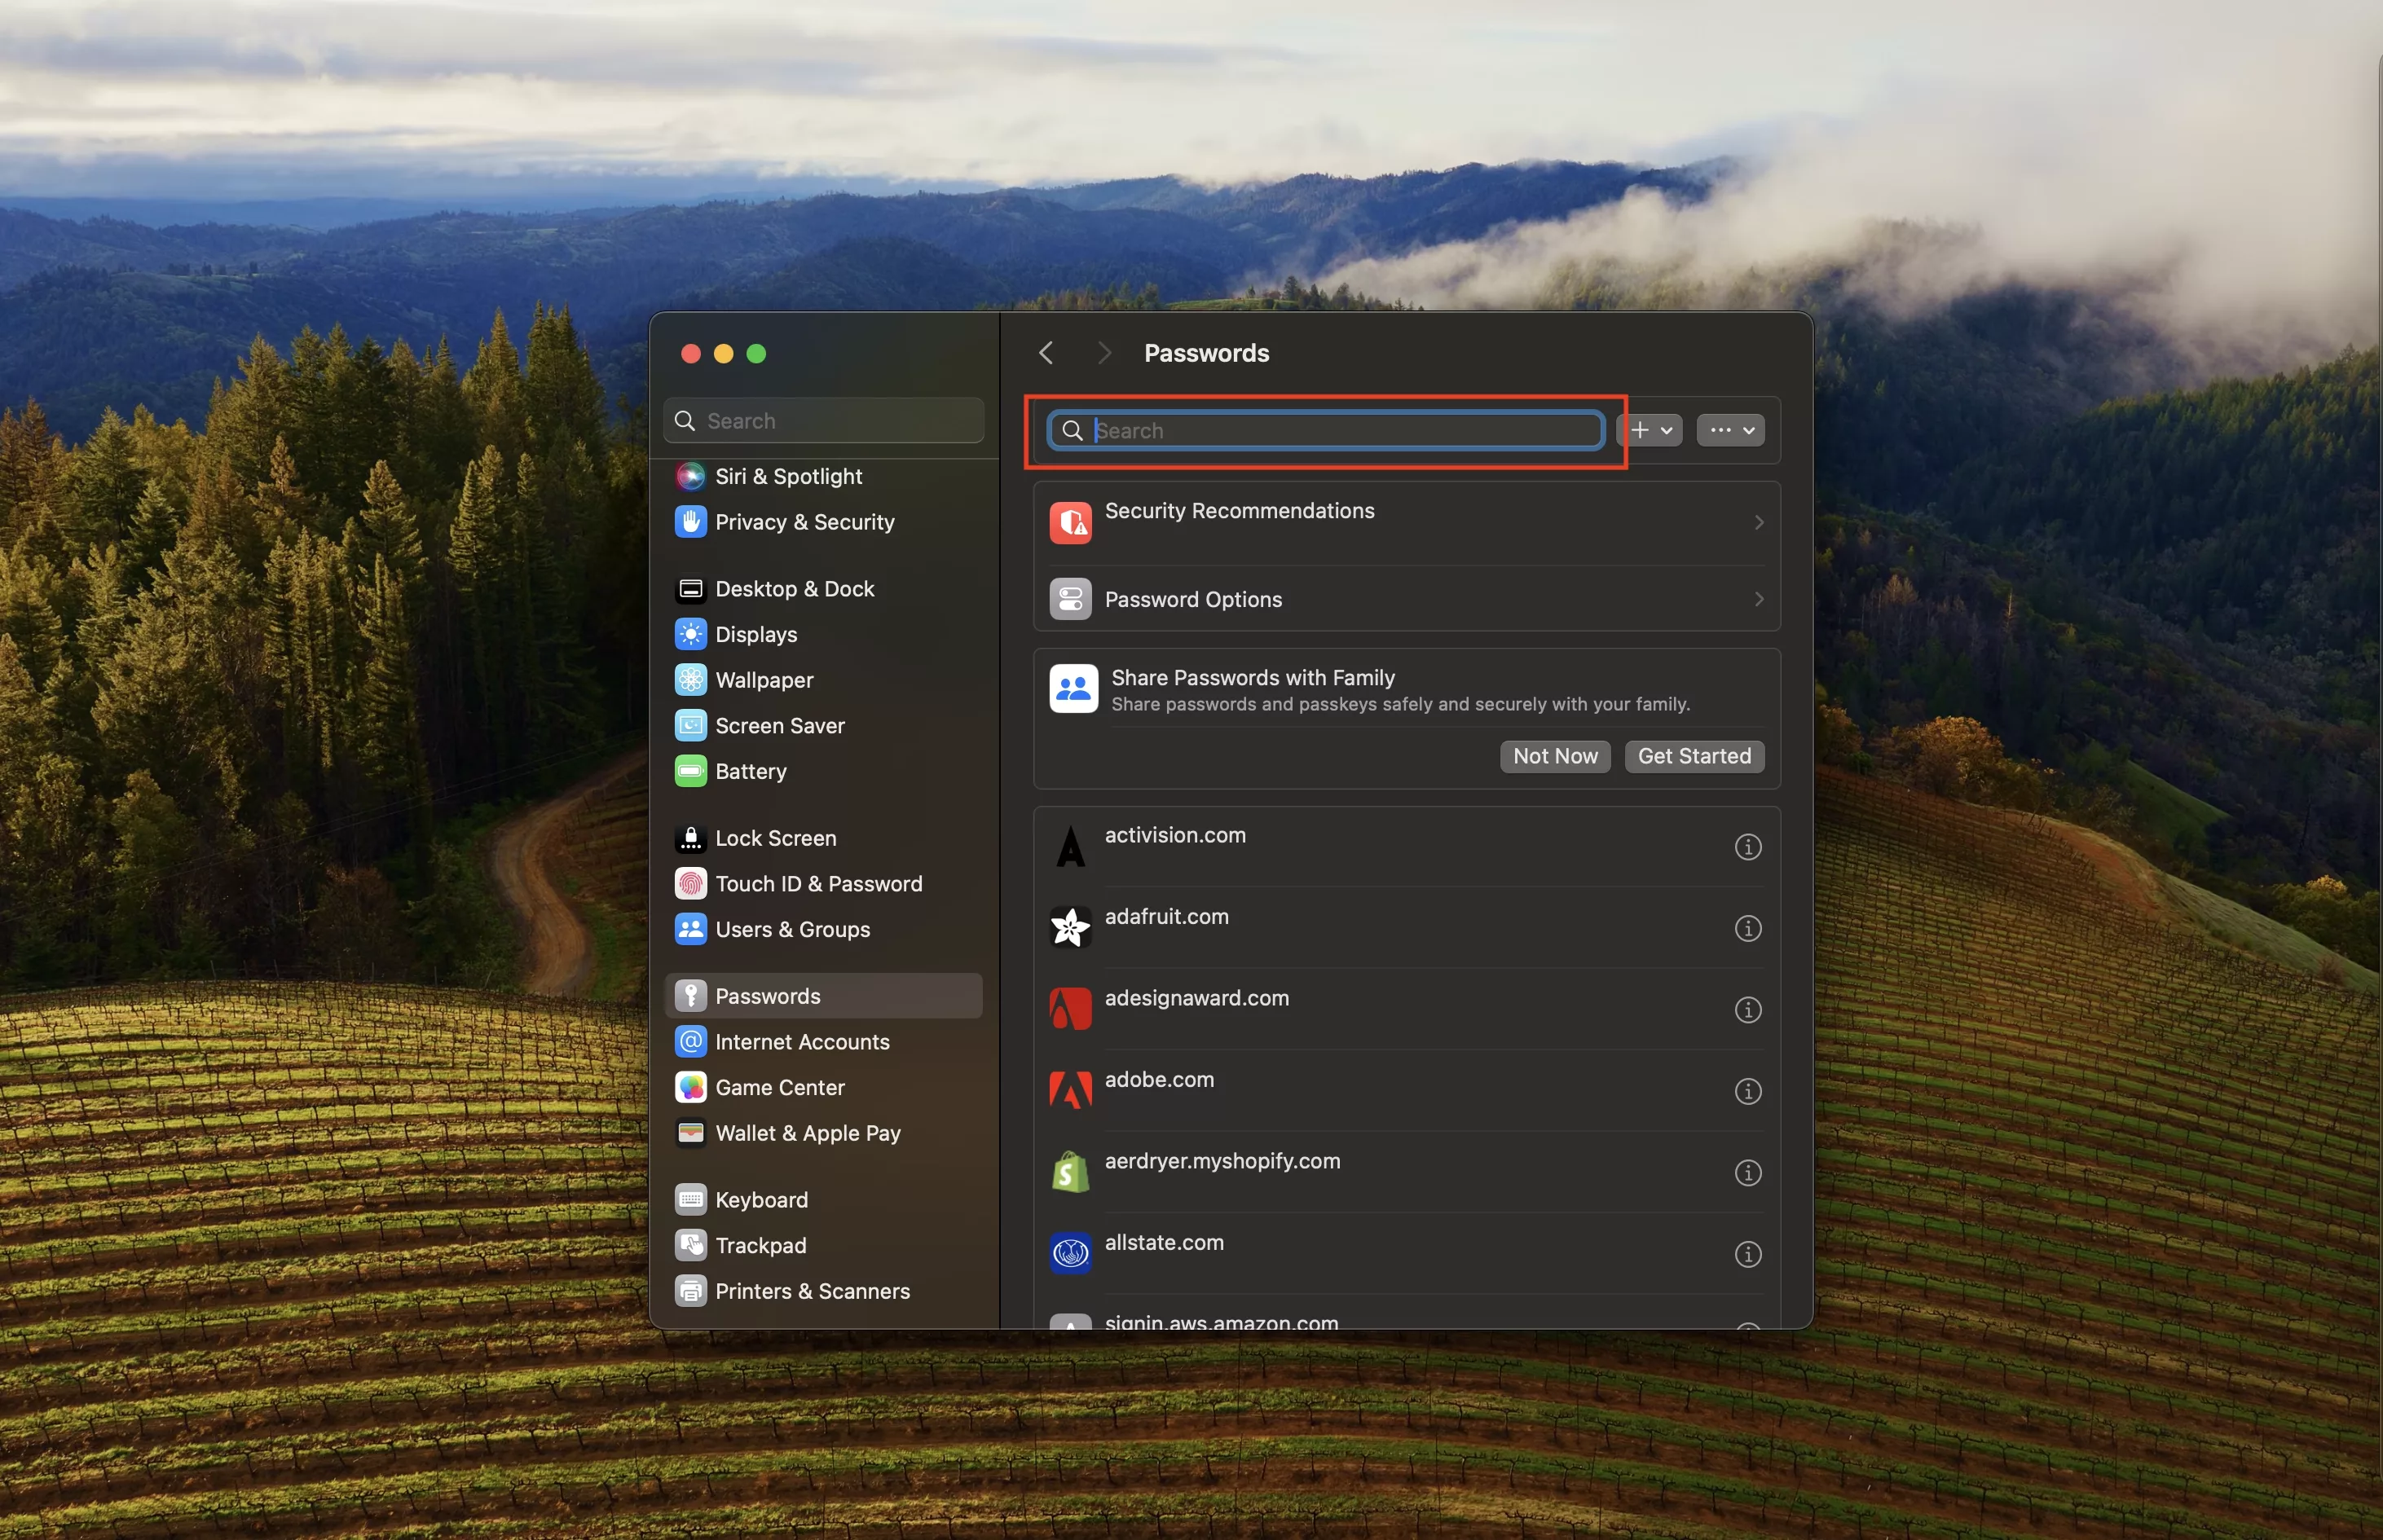 A screenshot of a MacBook desktop showing the System Settings app with the password manager open. Highlighted at the top in the center is the search field.